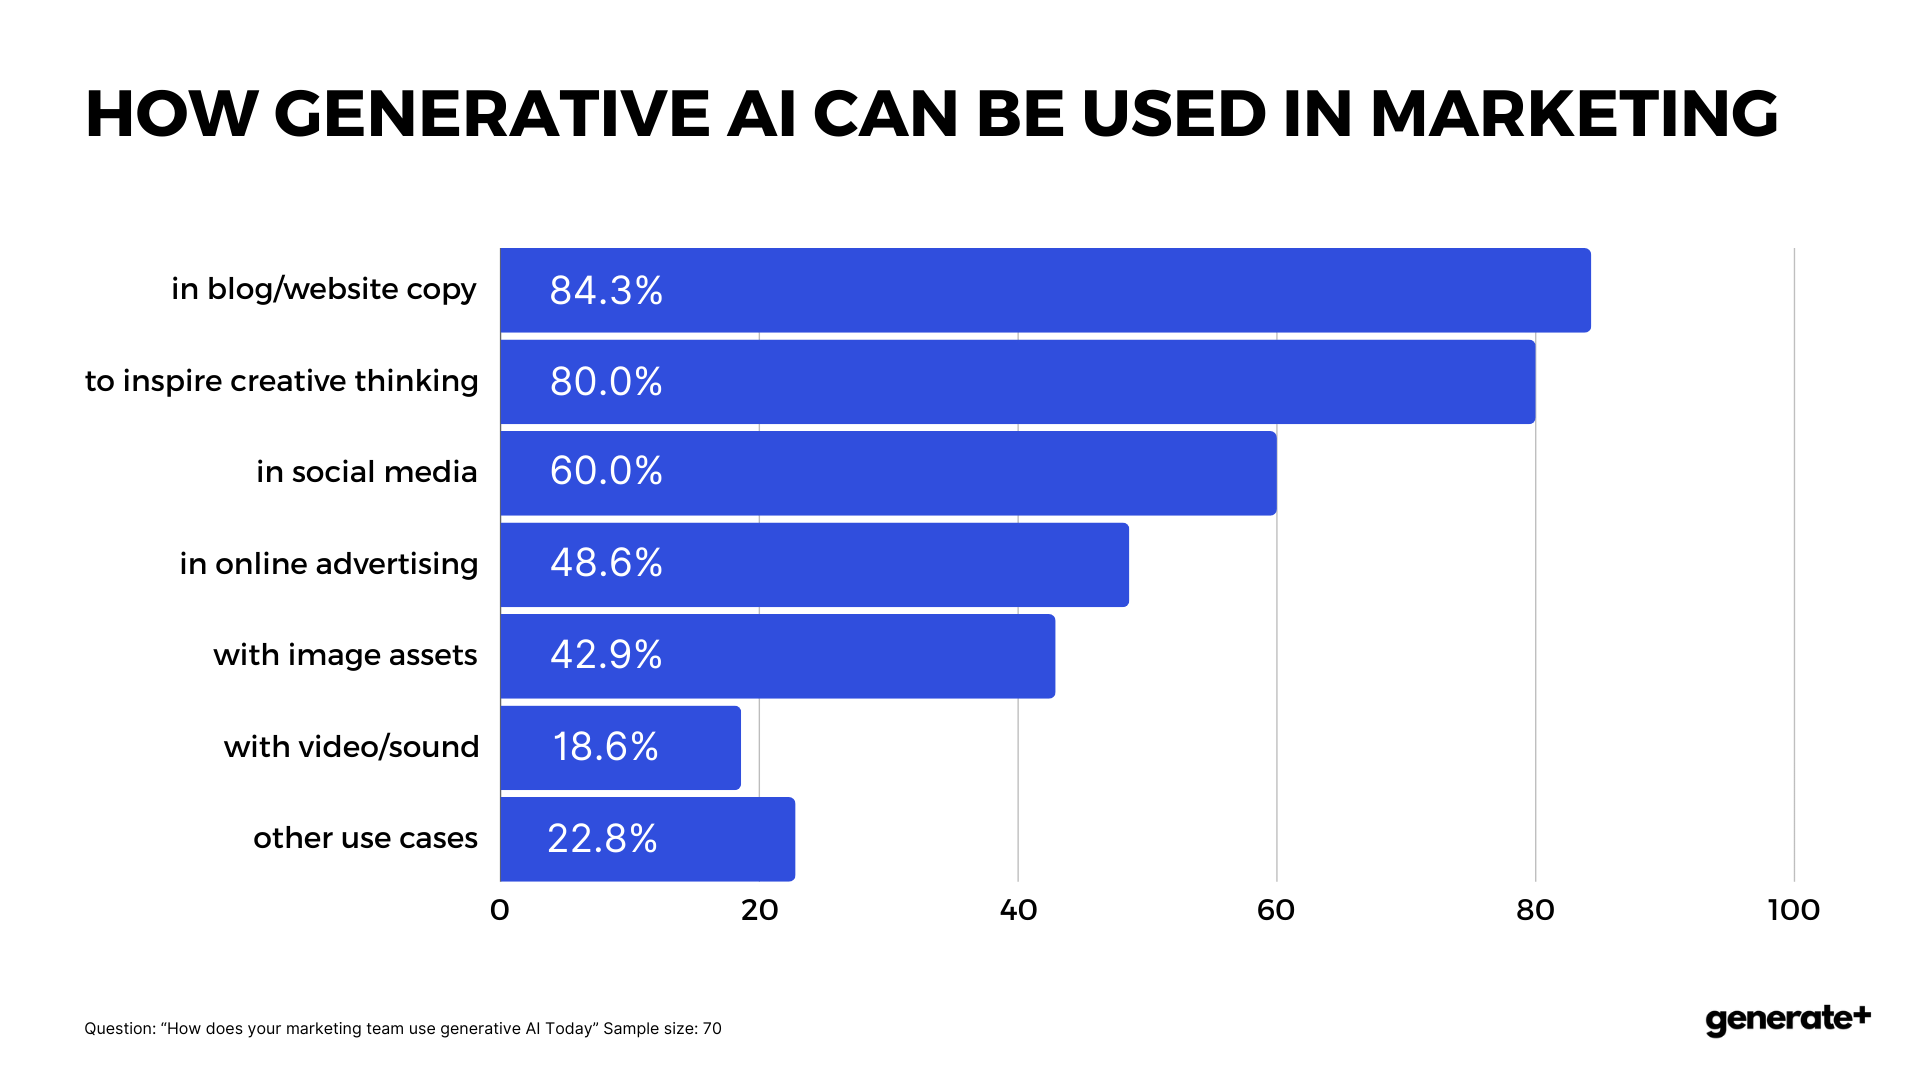 How generative AI can be used in marketing